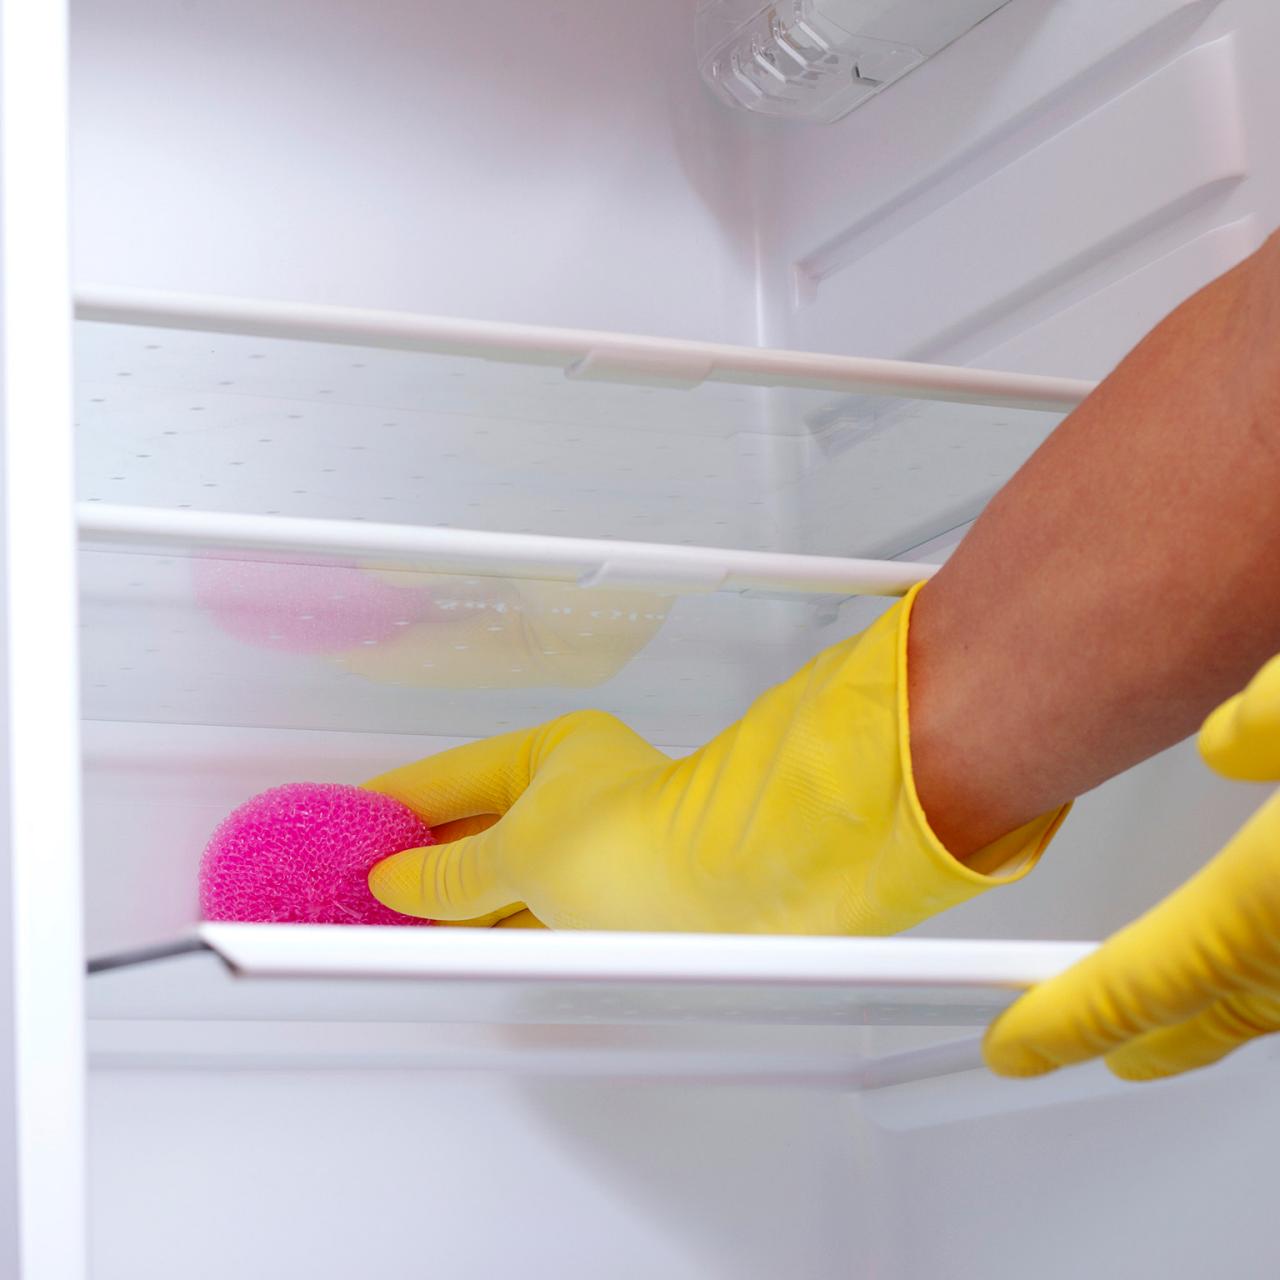 How to clean a refrigerator in 6 easy steps